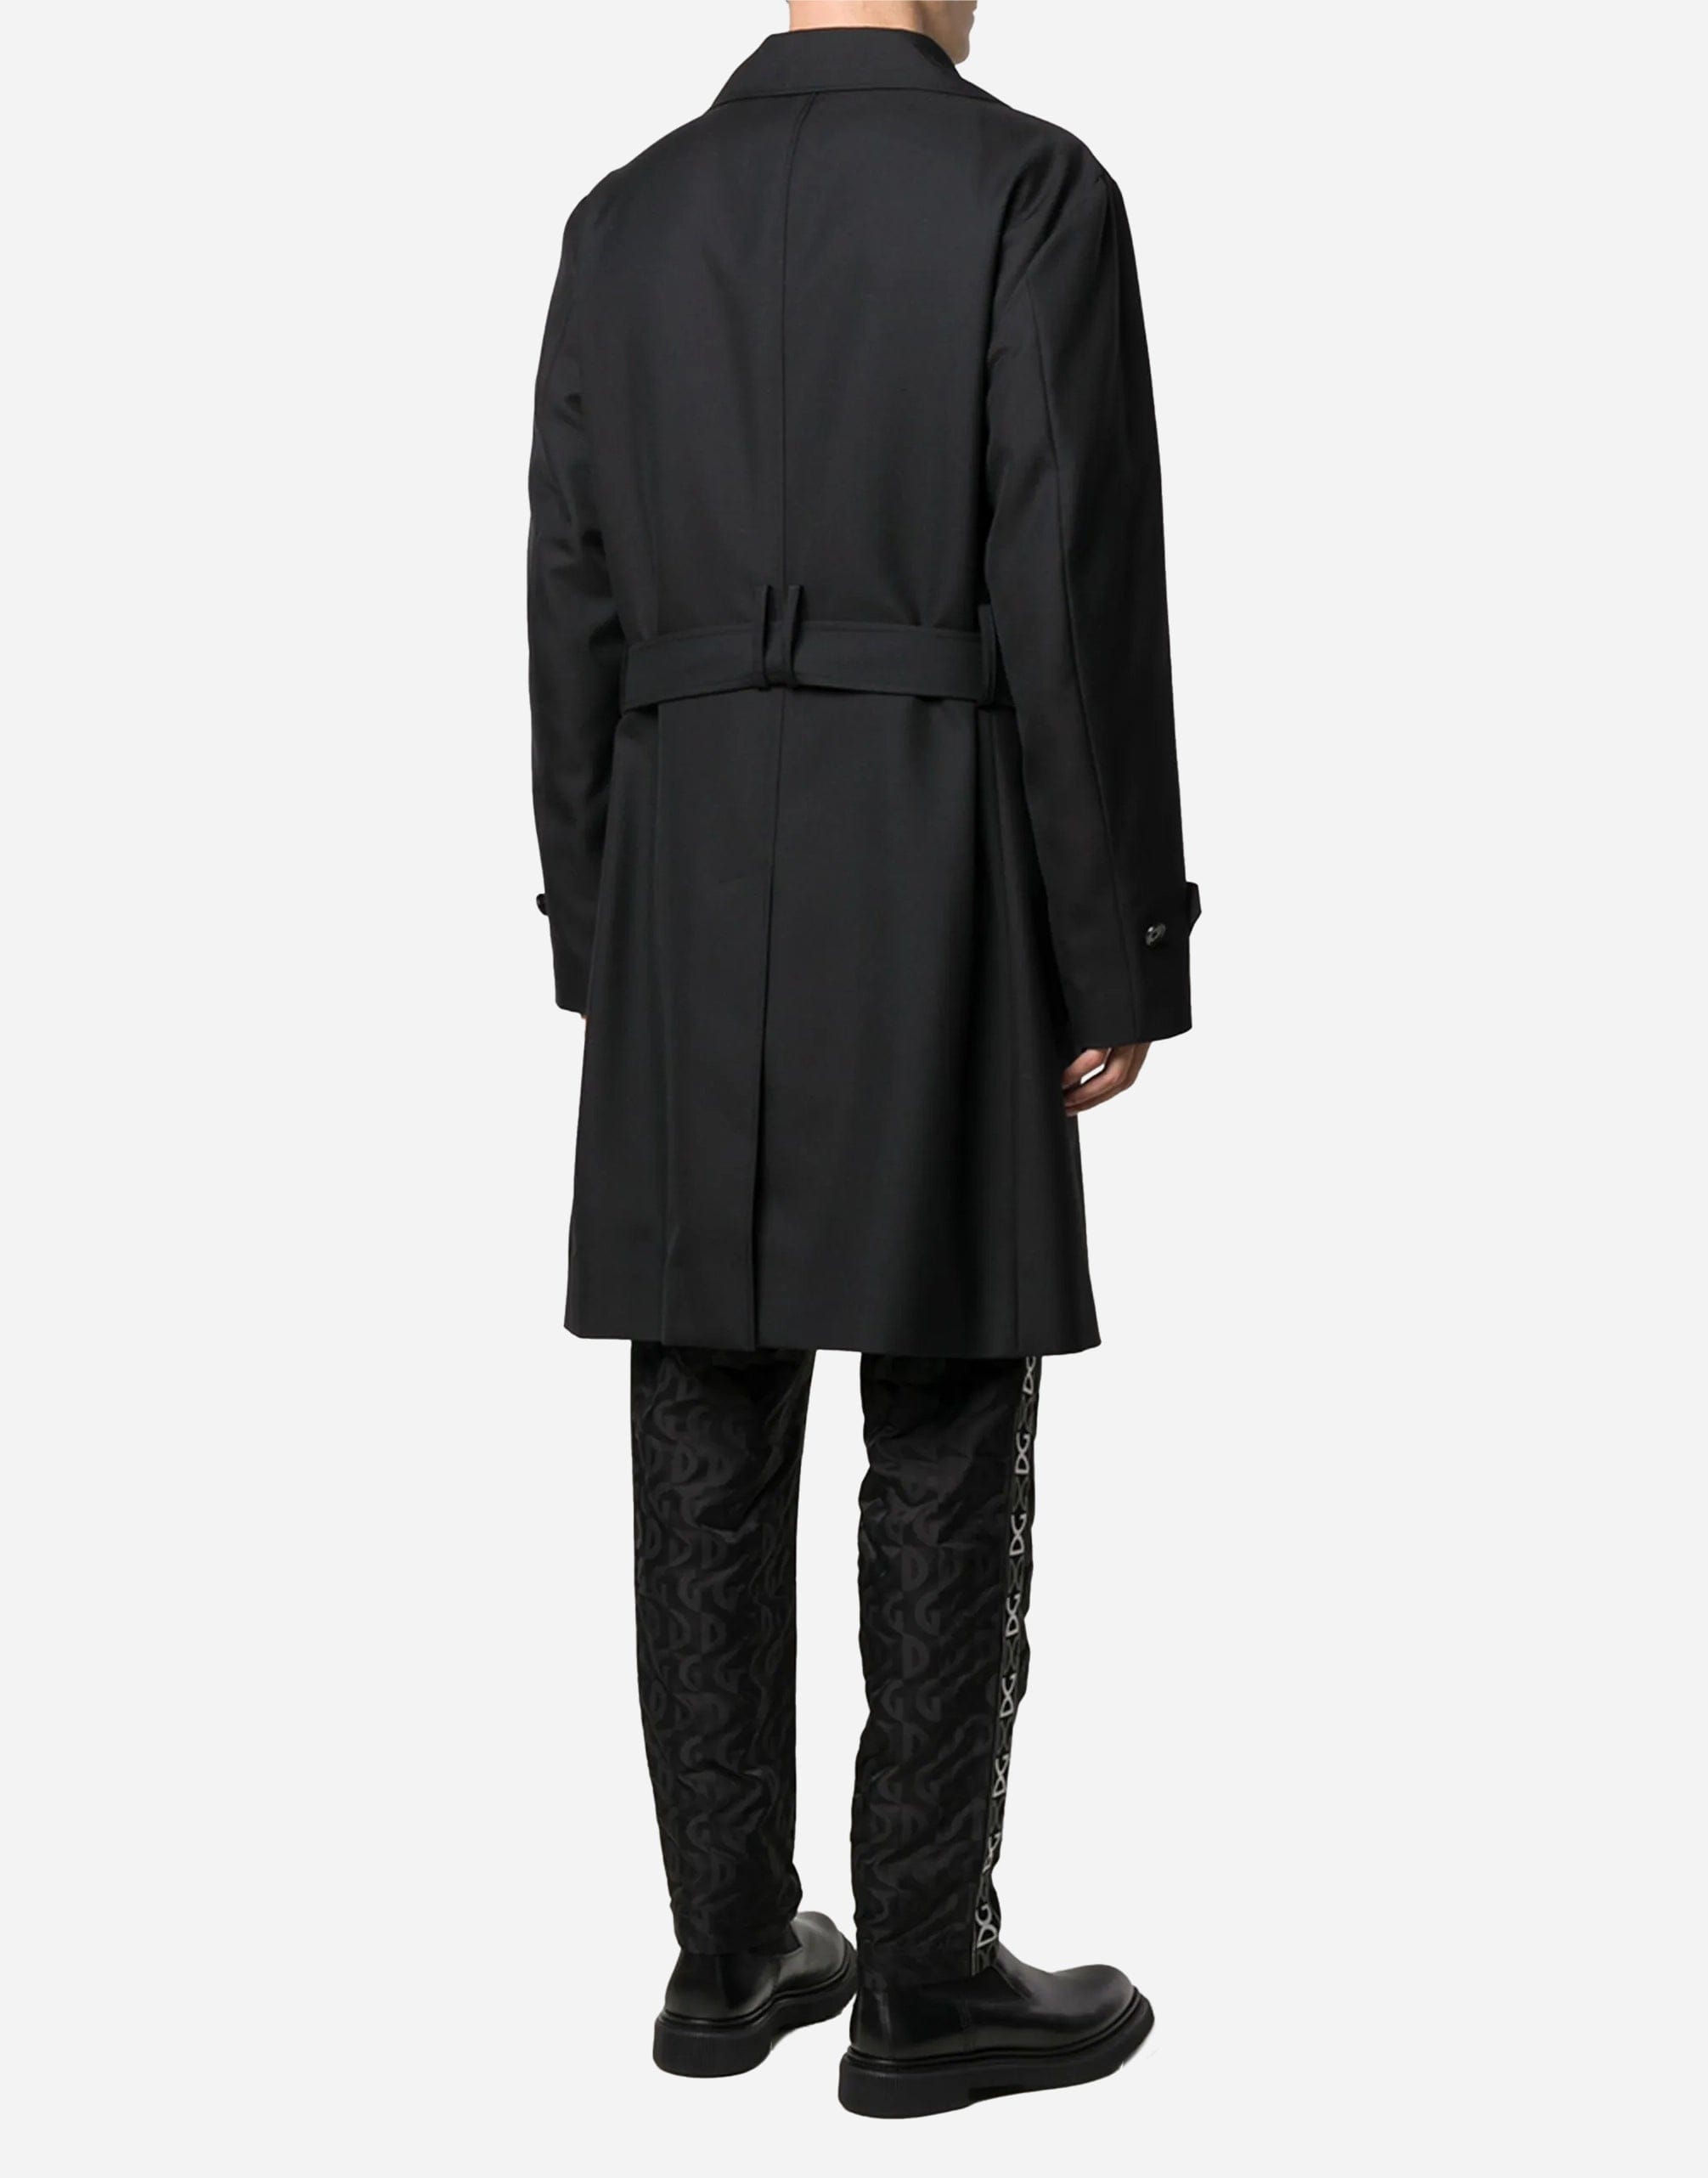 Dolce & Gabbana Belted Trench Coat